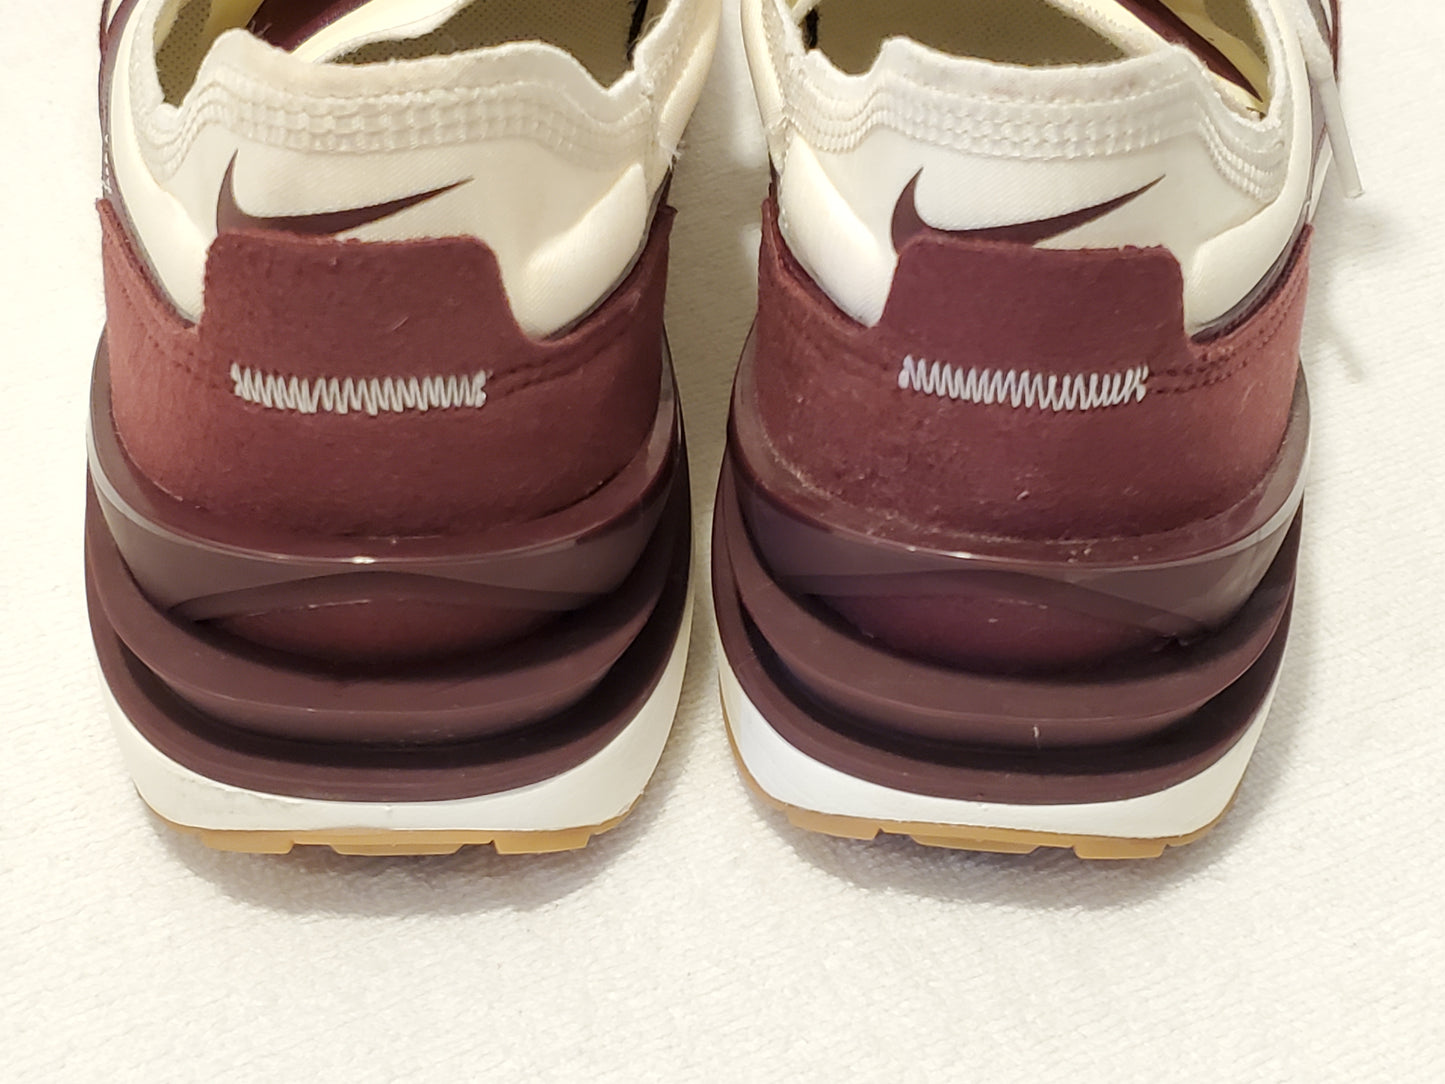 Nike Waffle One SE Men's Low Top Sneakers Size 11.5 Lace Up Walk Run Shoes Brown Coconut Maroon